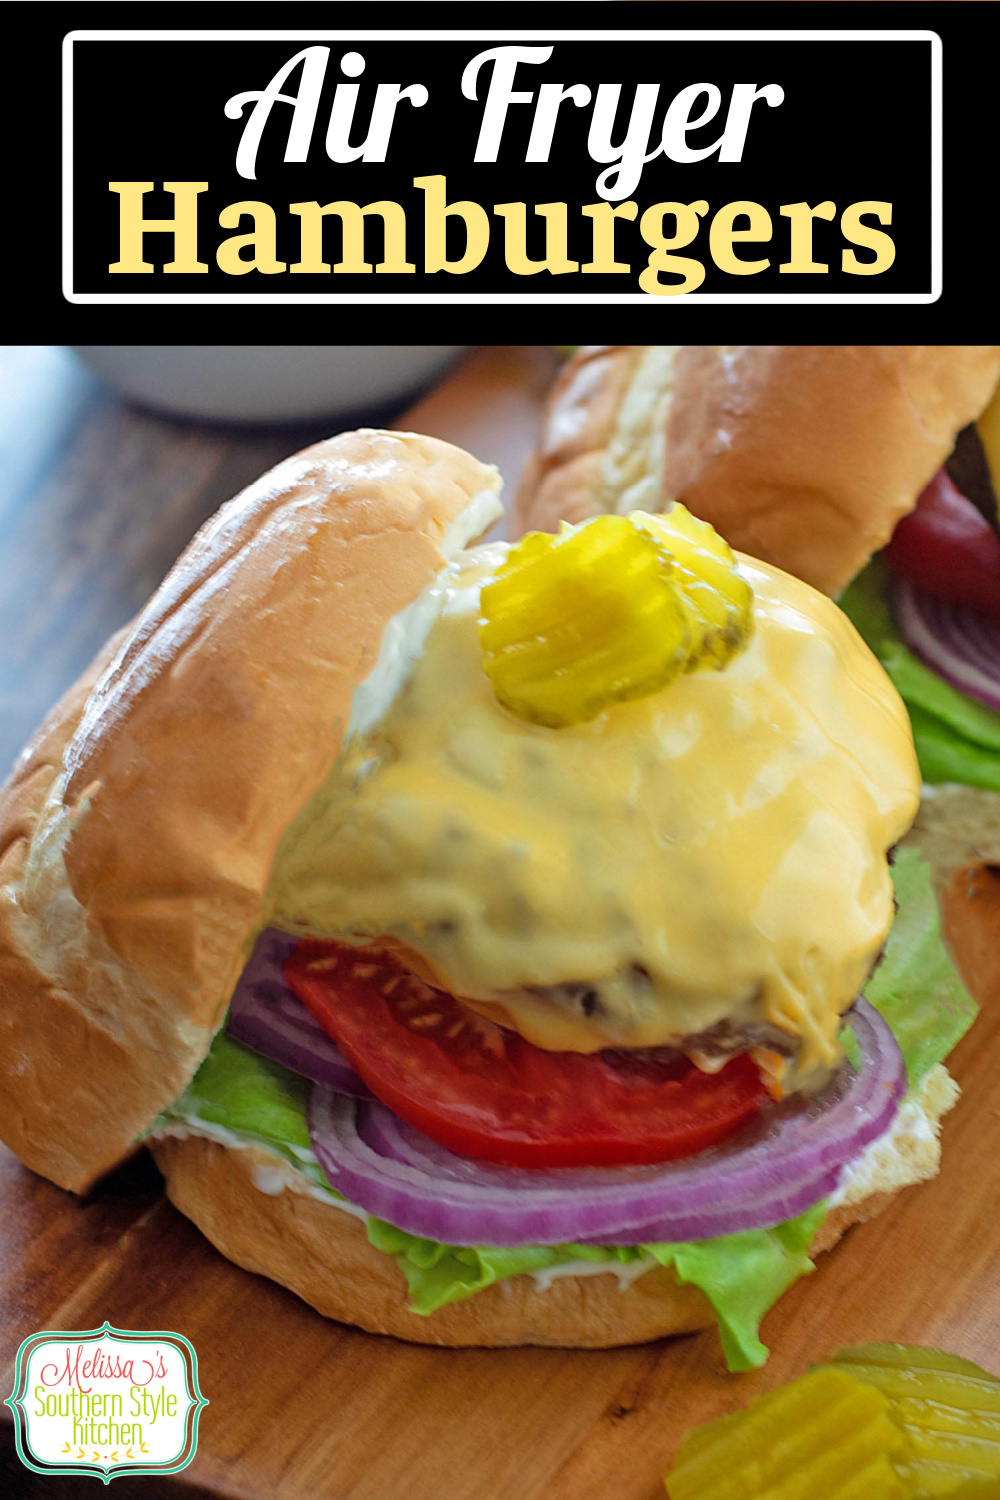 Top these juicy Air Fryer Hamburgers with your favorite fixing's and it's dinner in minutes with easy clean-up, too #airfryerrecipes #hamburgers #airfryerhamburgers #besthamburgerecipes #airfryers #airfryercheeseburgers #cheeseburgerrecipes #easygroundbeefrecipes via @melissasssk